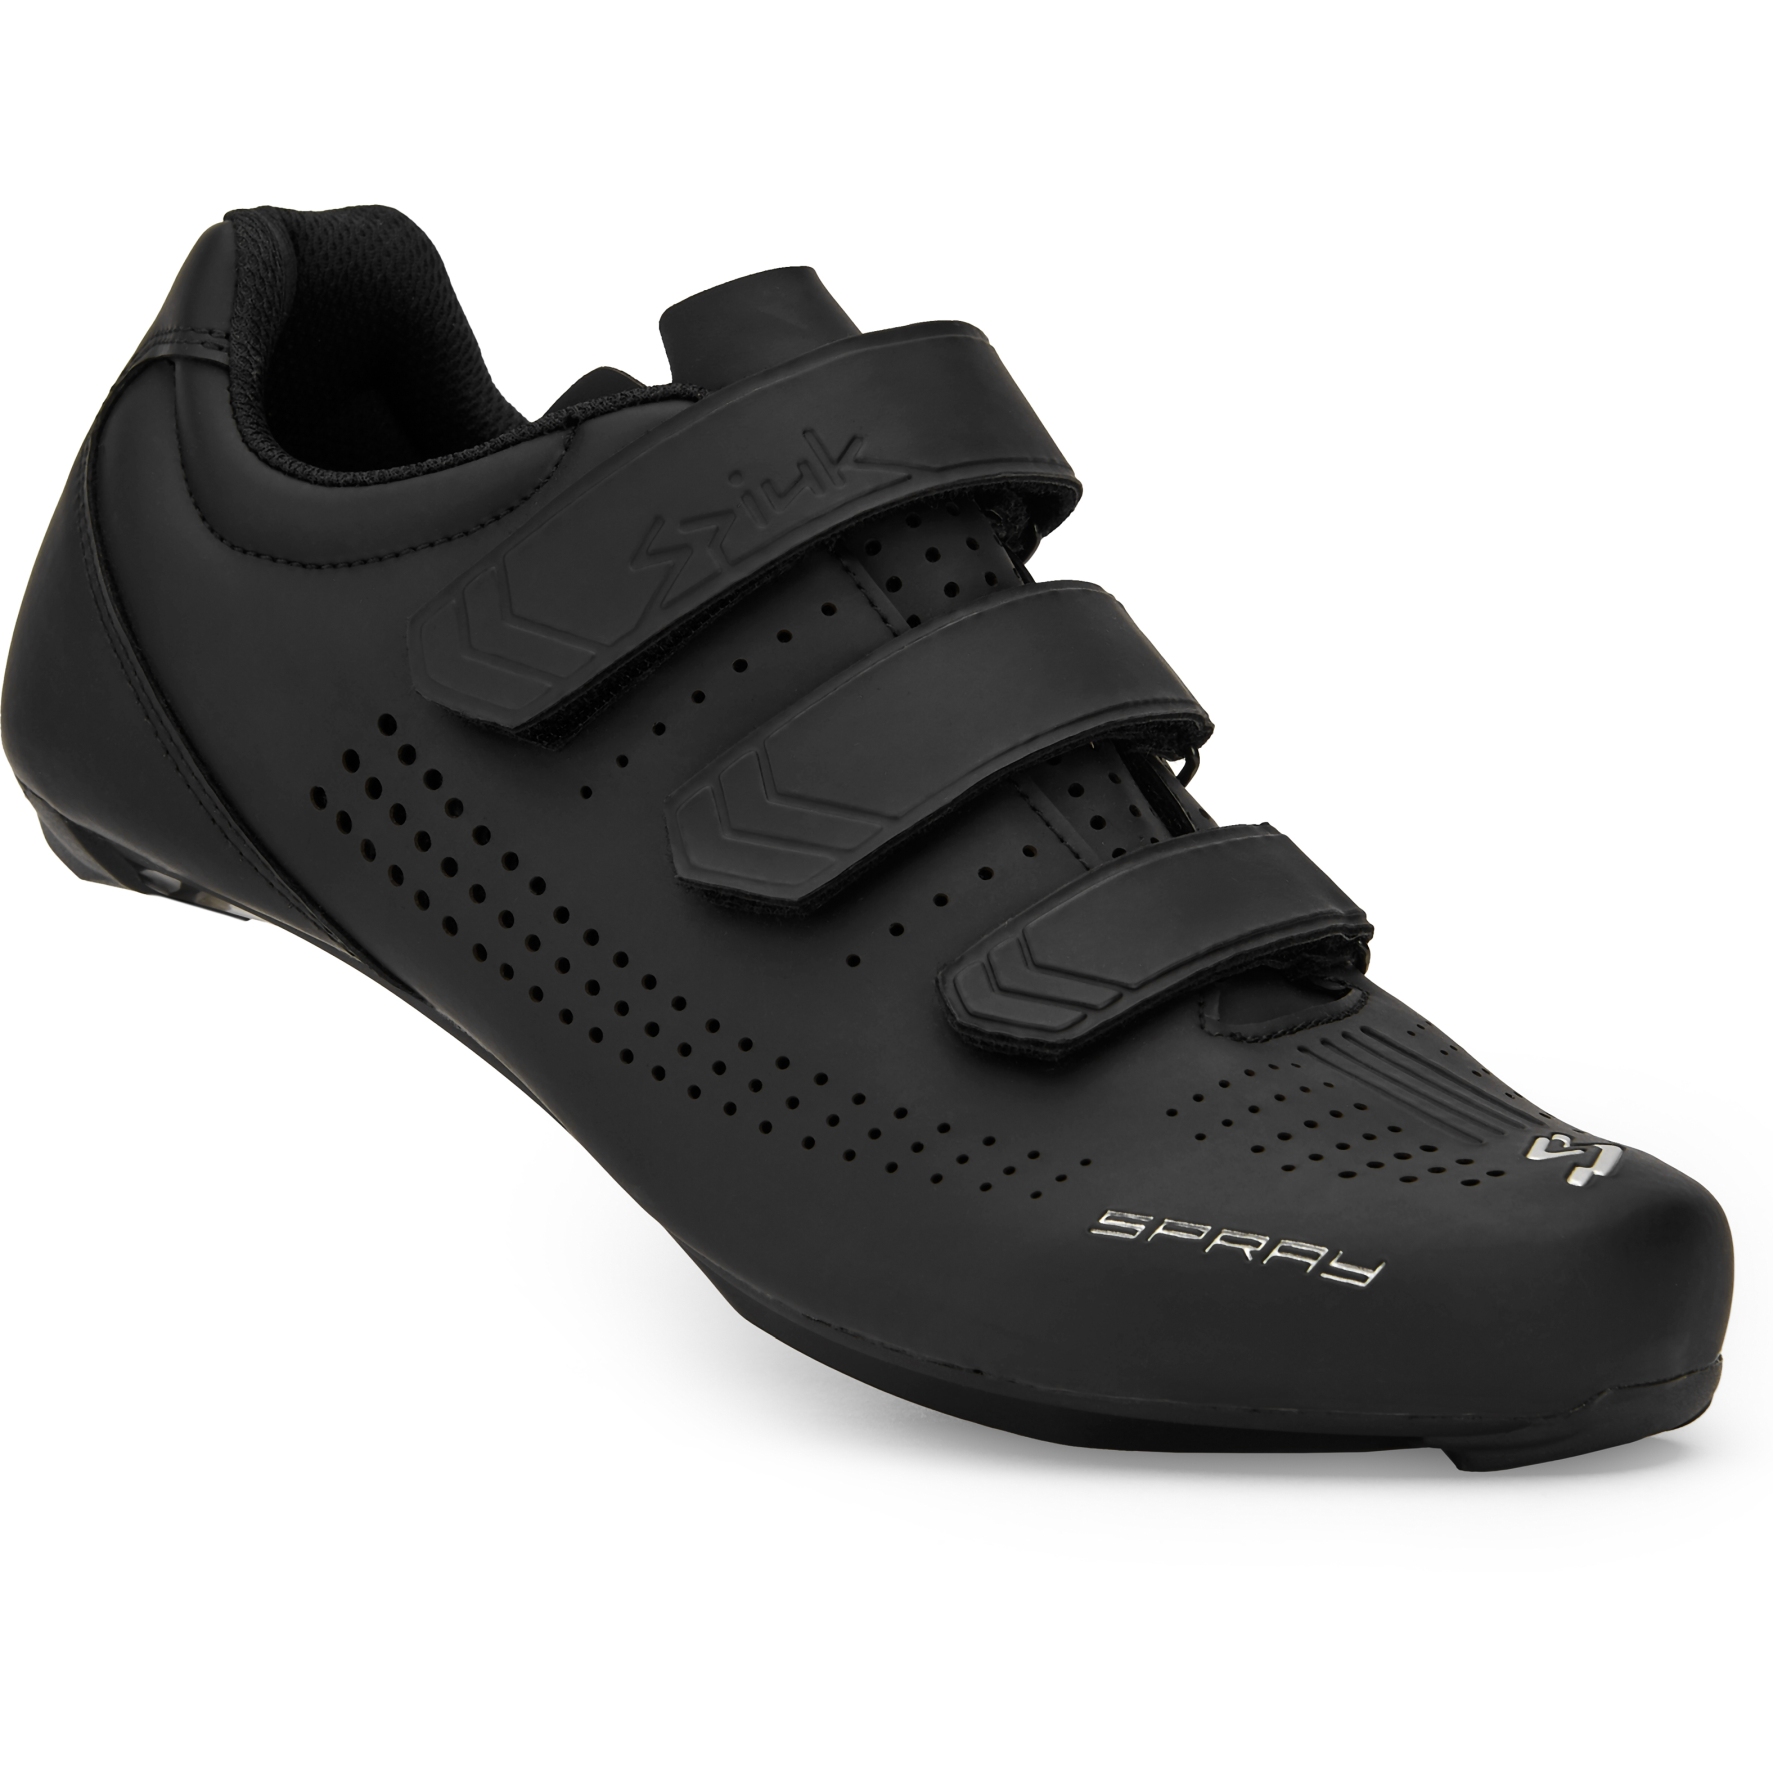 Picture of Spiuk Spray Road Shoe - black